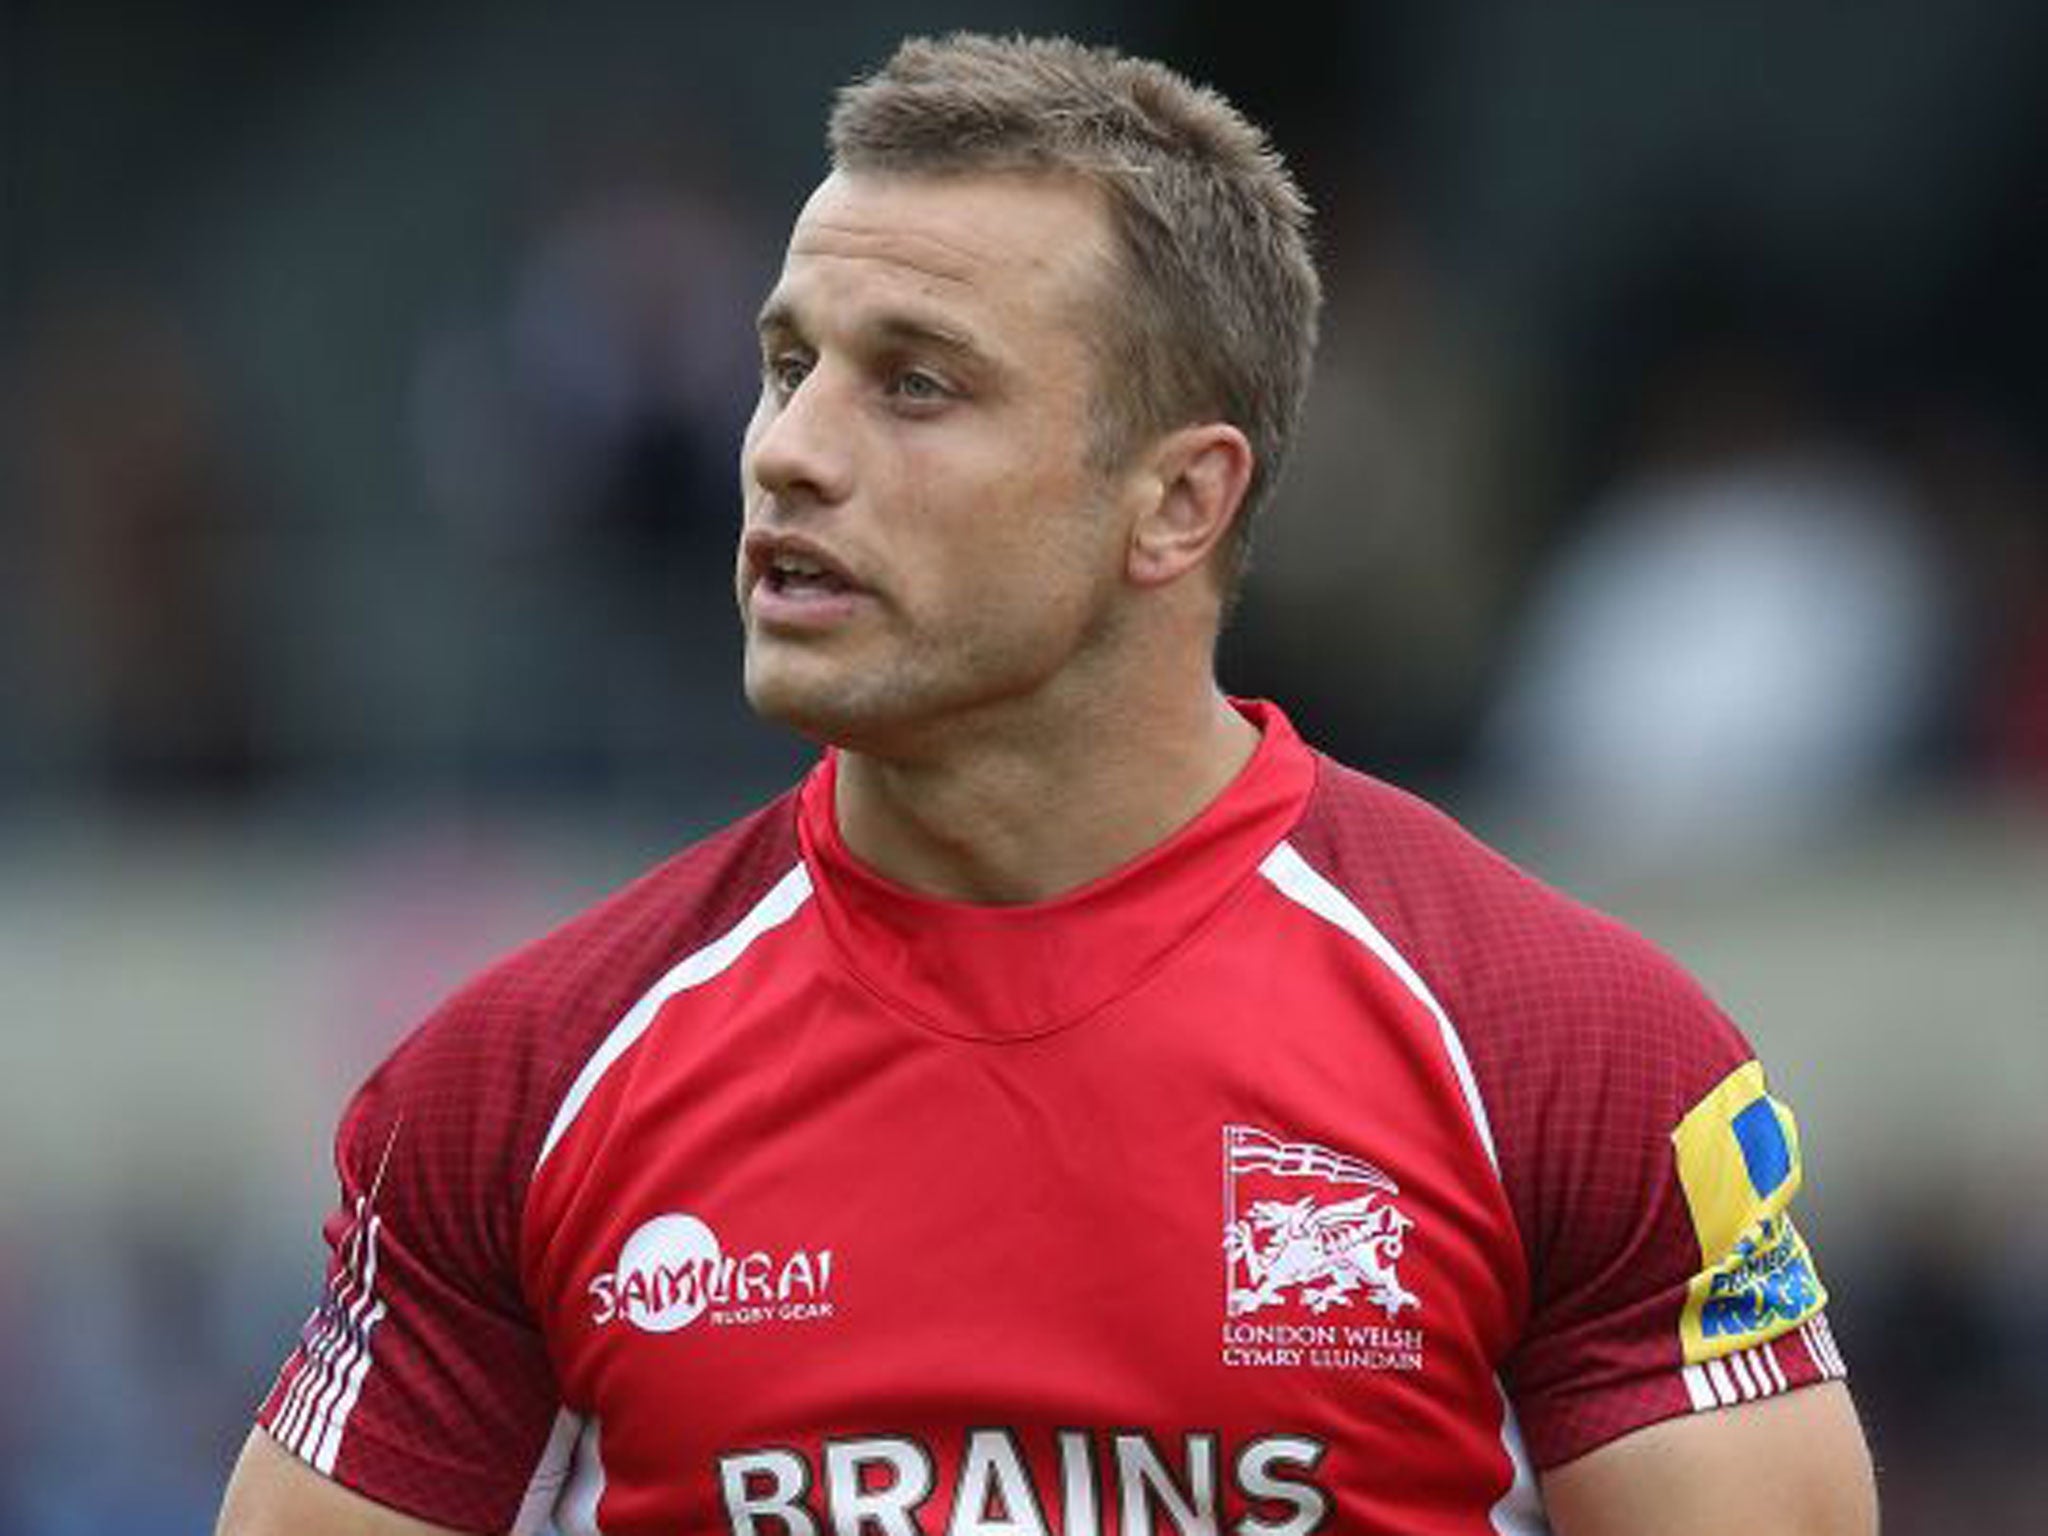 Tyson Keats’ ineligibility to play could cost London Welsh dear